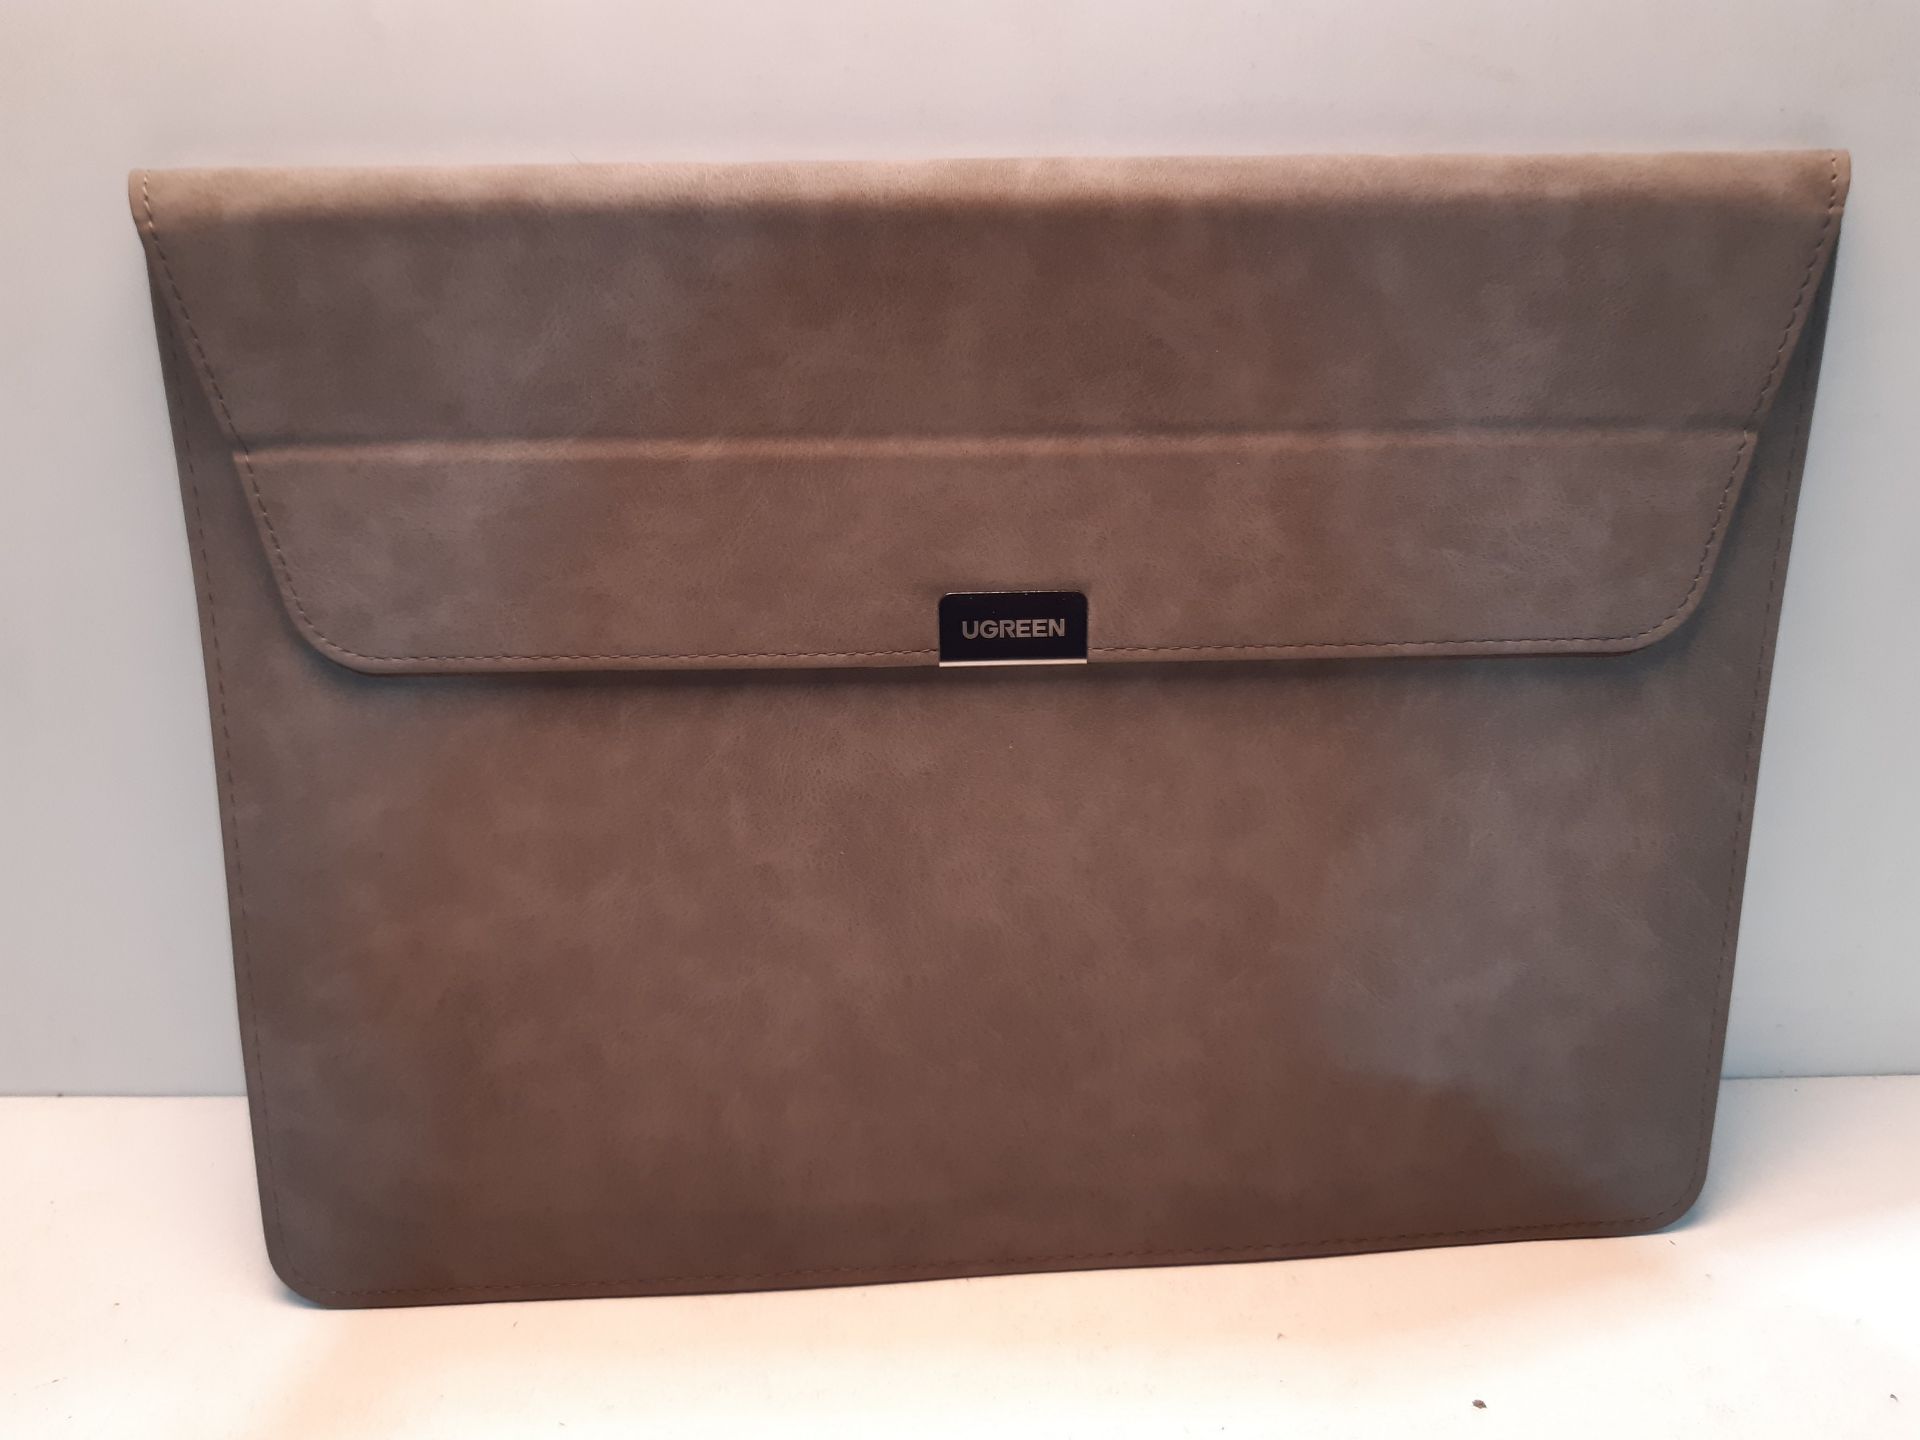 RRP £15.02 UGREEN Laptop Case for 13-13.9 inch Slim Laptop Sleeve - Image 2 of 2